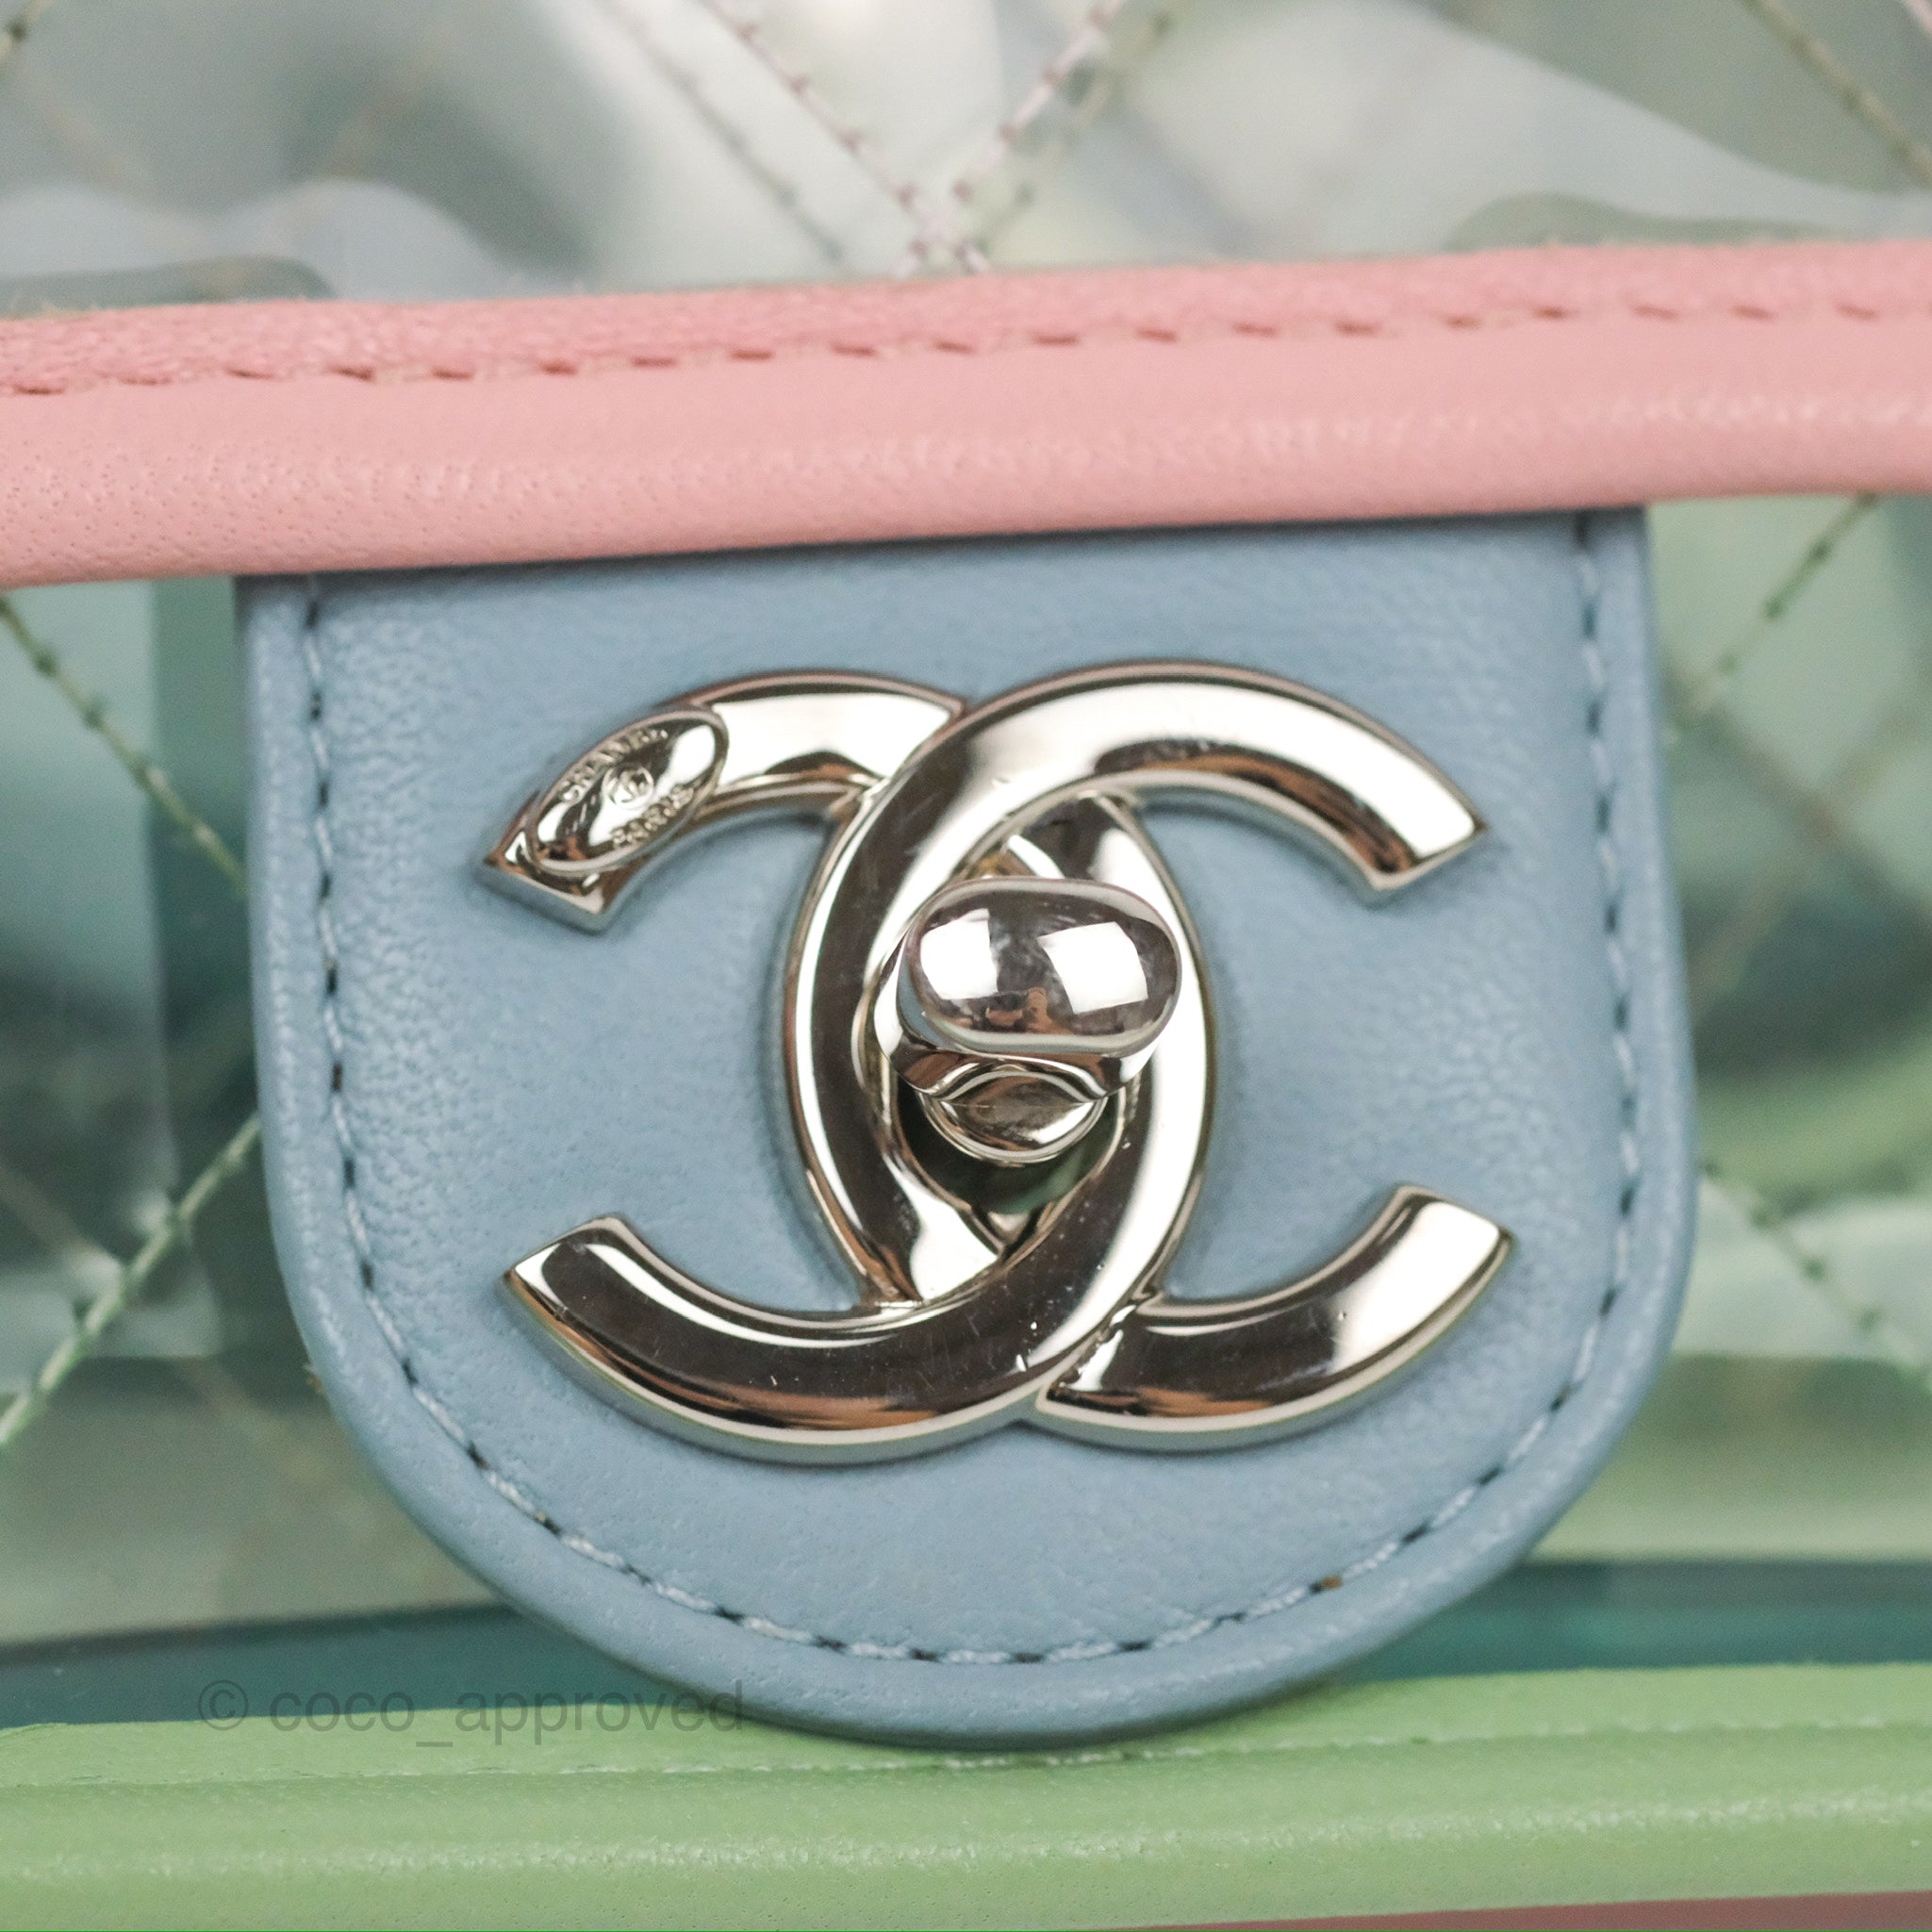 Chanel Flap Bag Transparent PVC/Lambskin Silver-tone Blue/Green/Pink in  PVC/Lambskin with Silver-Tone - US